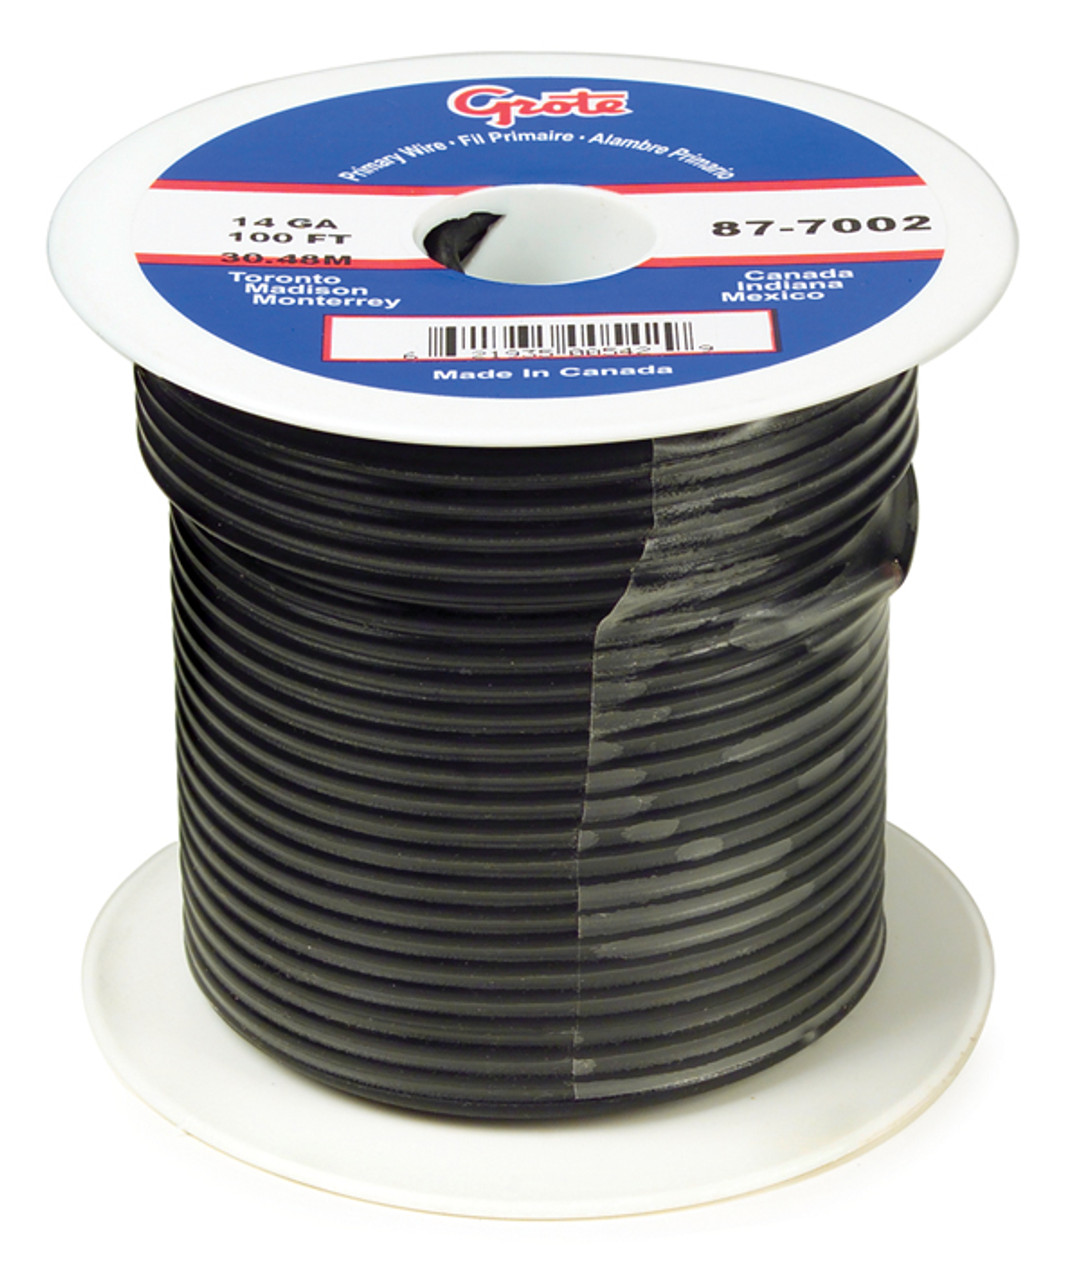 18 AWG General Purpose Thermo Plastic Wire @ 1000' - Black  88-9002